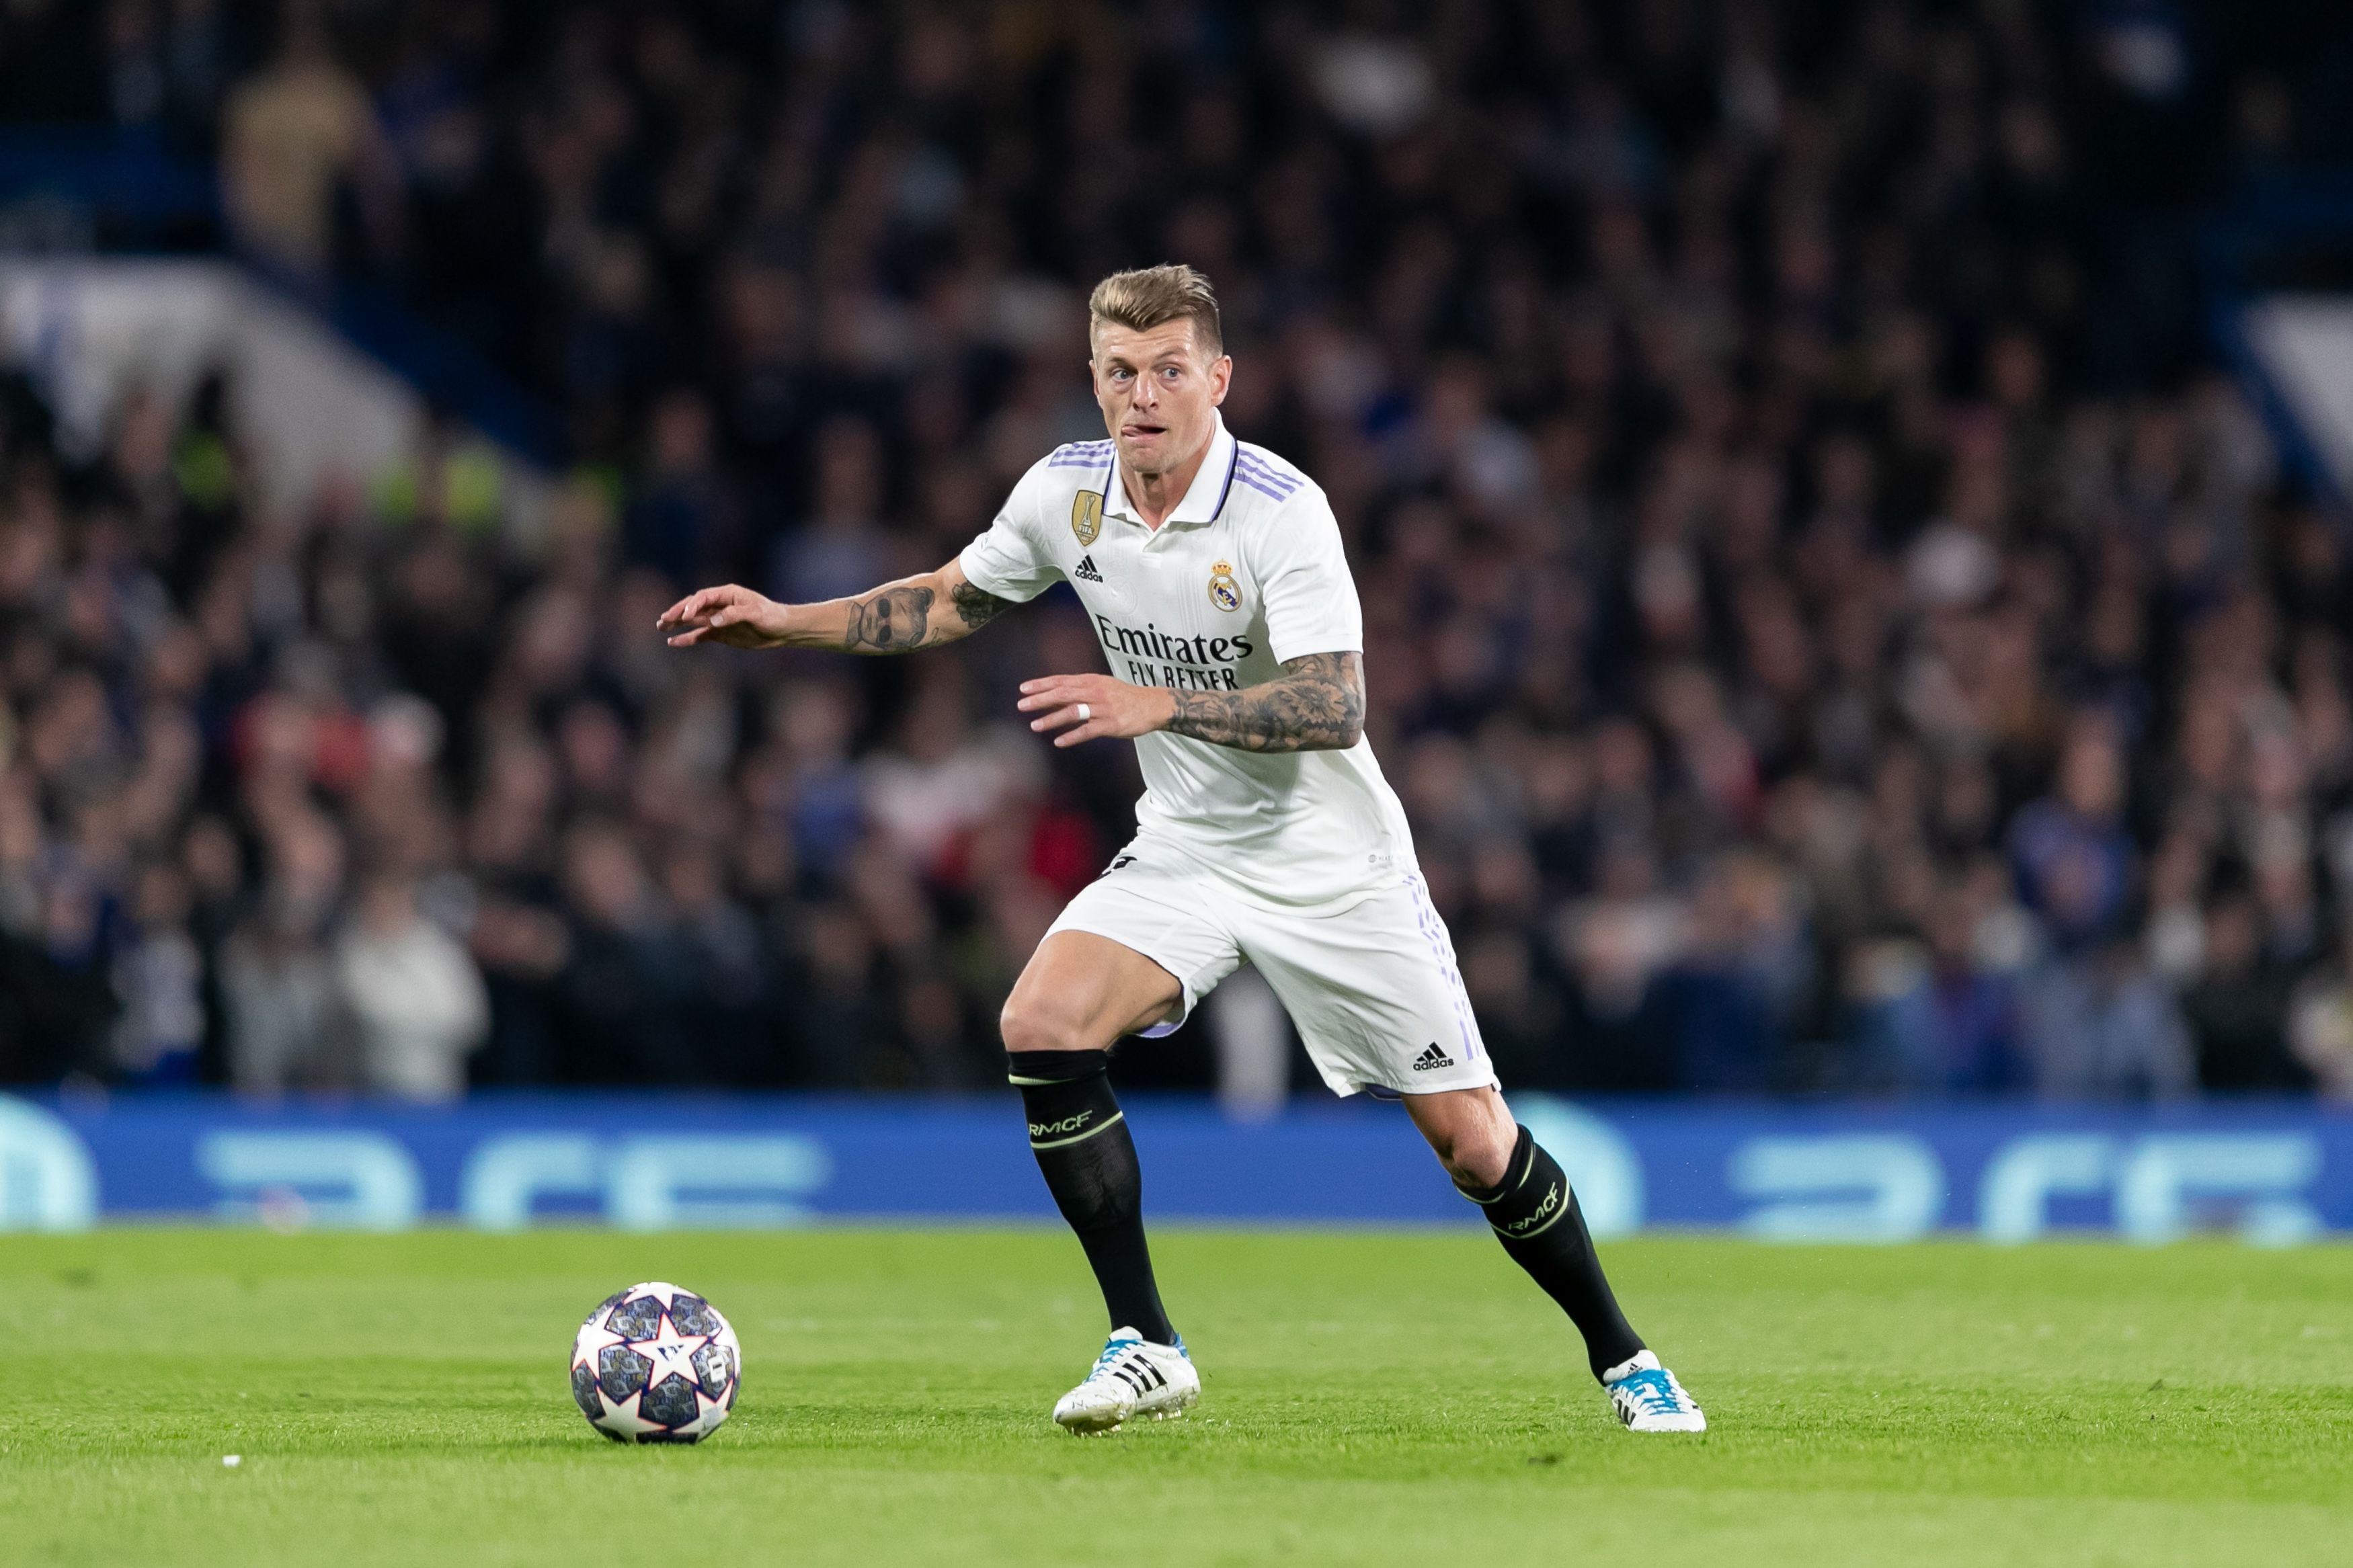 LONDON, ENGLAND - APRIL 18: Toni Kroos of Real Madrid in action during the UEFA Champions League quarterfinal second leg match between Chelsea FC and Real Madrid at Stamford Bridge on April 18, 2023 in London, United Kingdom. (Photo by Gaspafotos/MB Media/Getty Images)